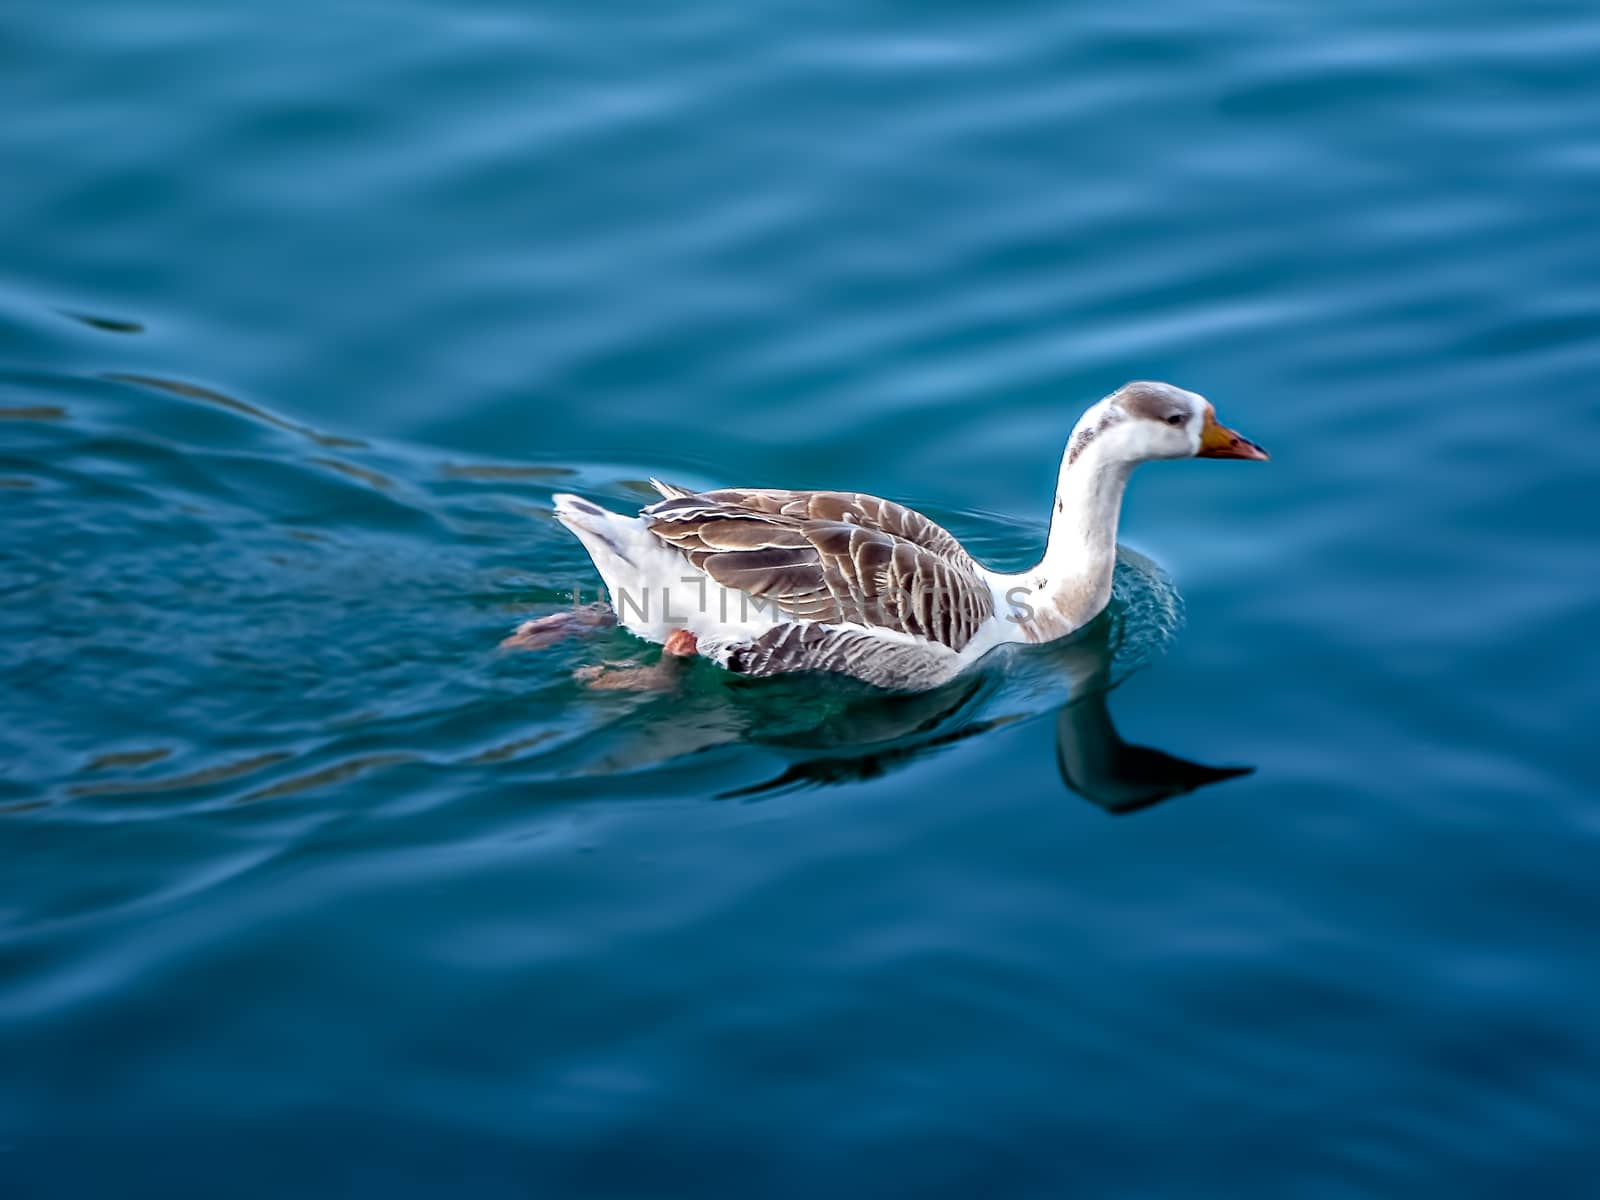 Making a reflection, single duck swimming in calm blue waters of lake. by lalam